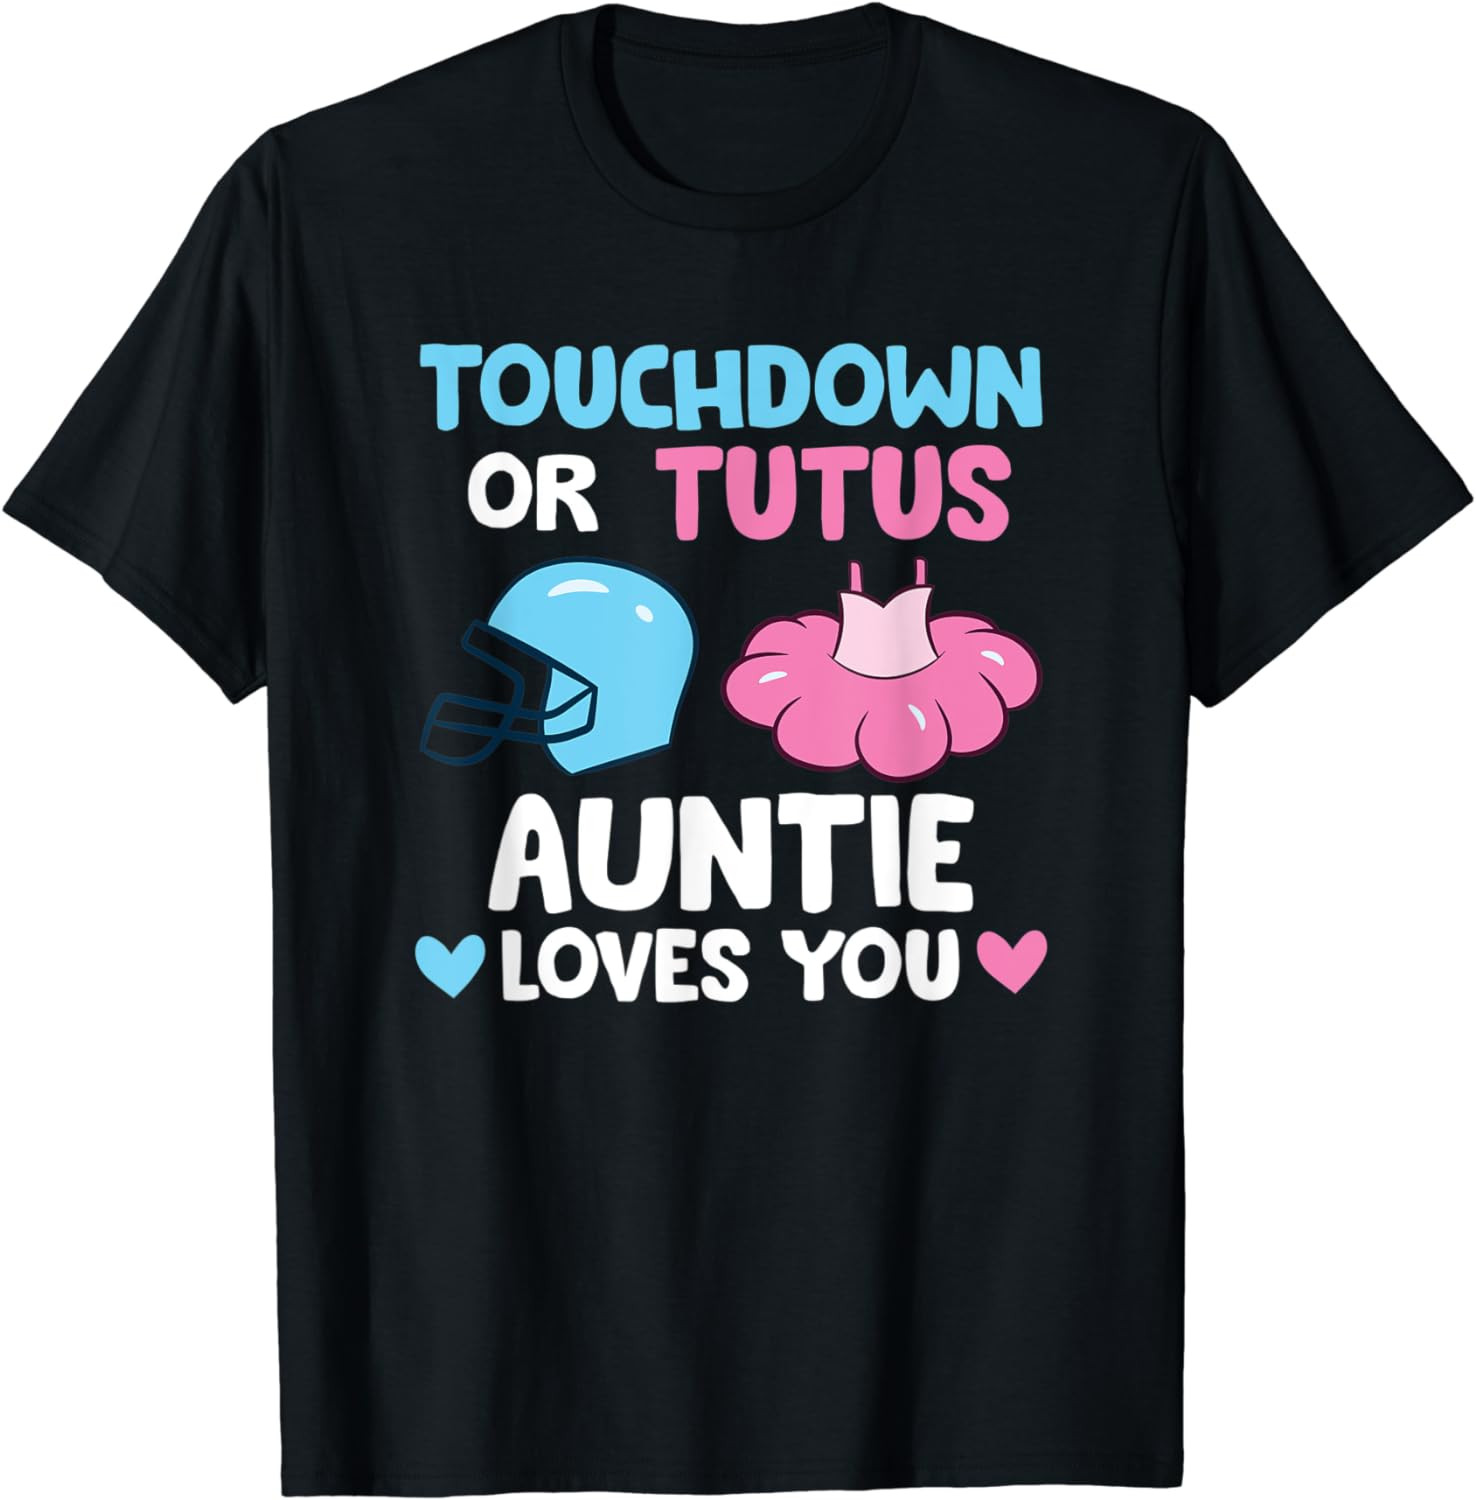 Touchdown Or Tutus Auntie Loves You Matching Gender Reveal T-Shirt